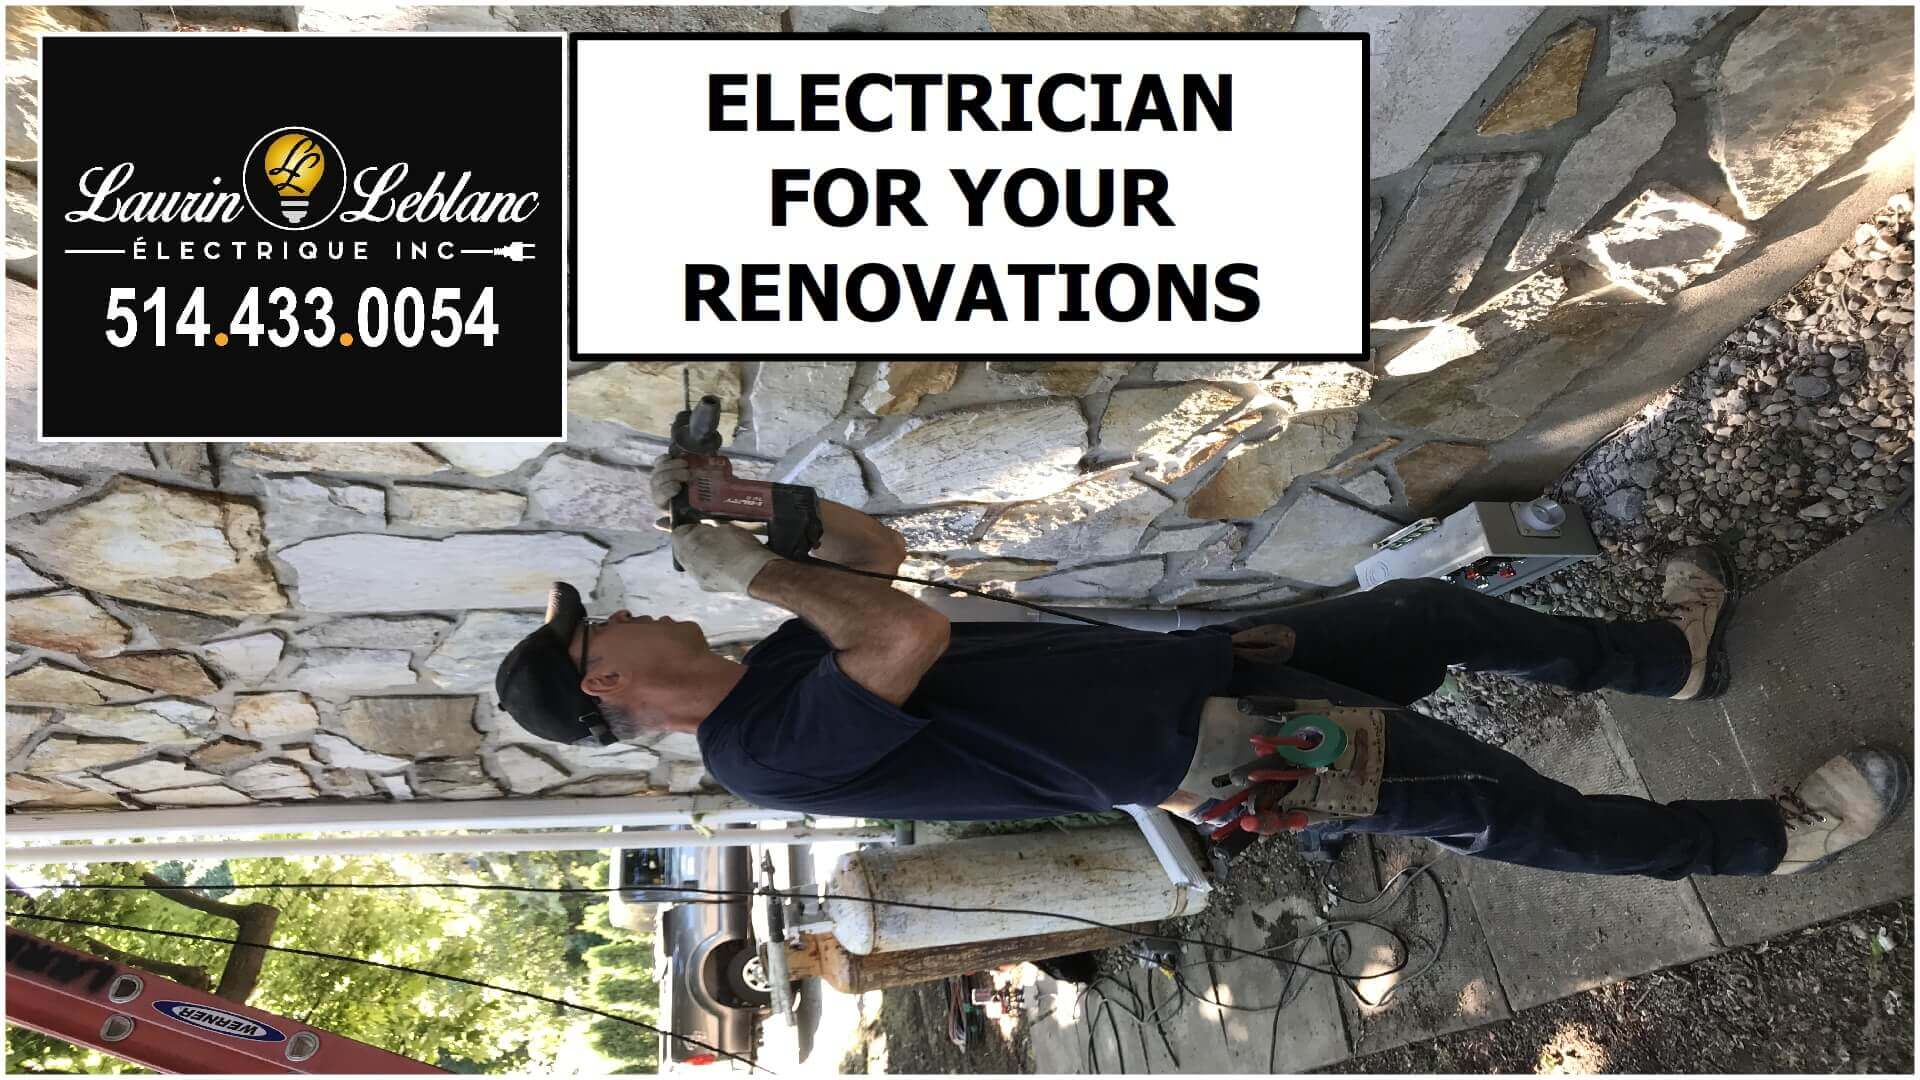 Electrician Renovations in Montreal